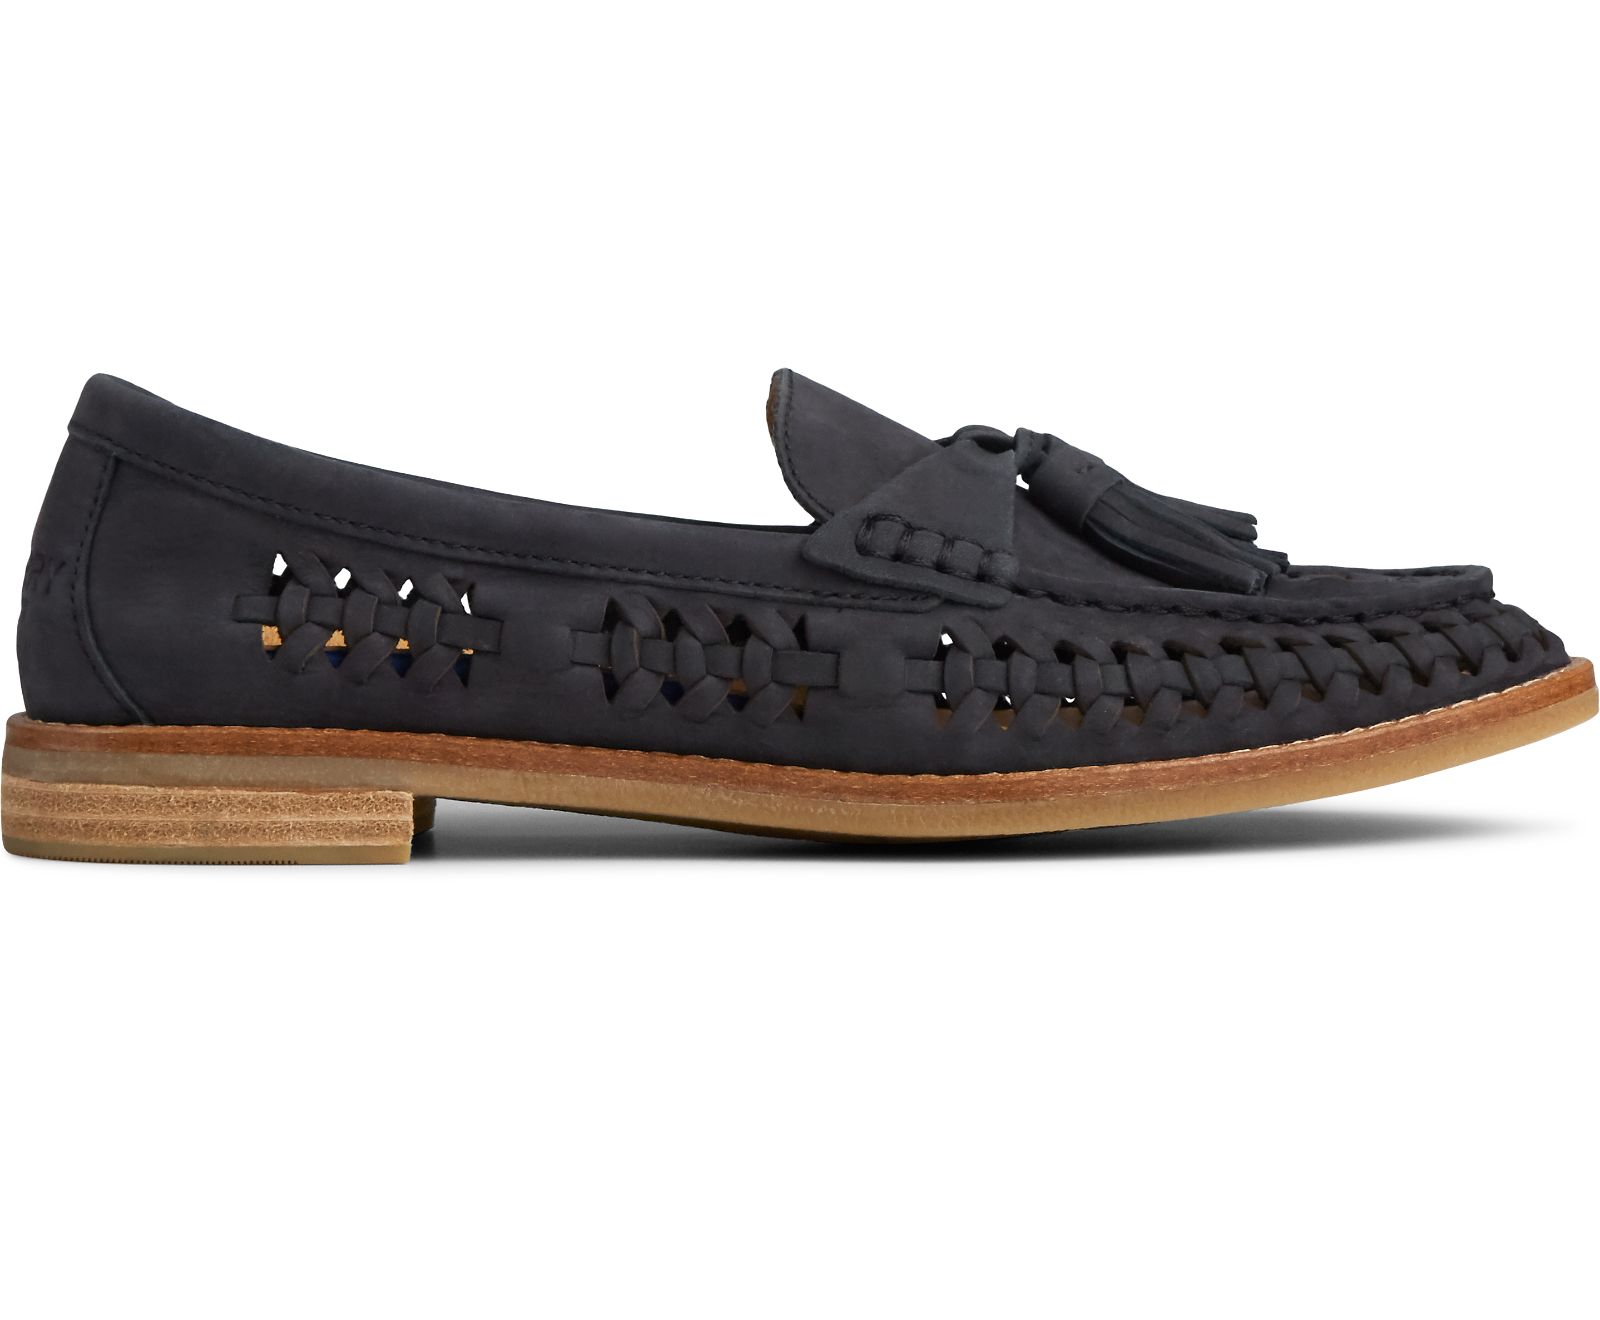 Women's Seaport Penny PLUSHWAVE Woven Leather Loafer - Black